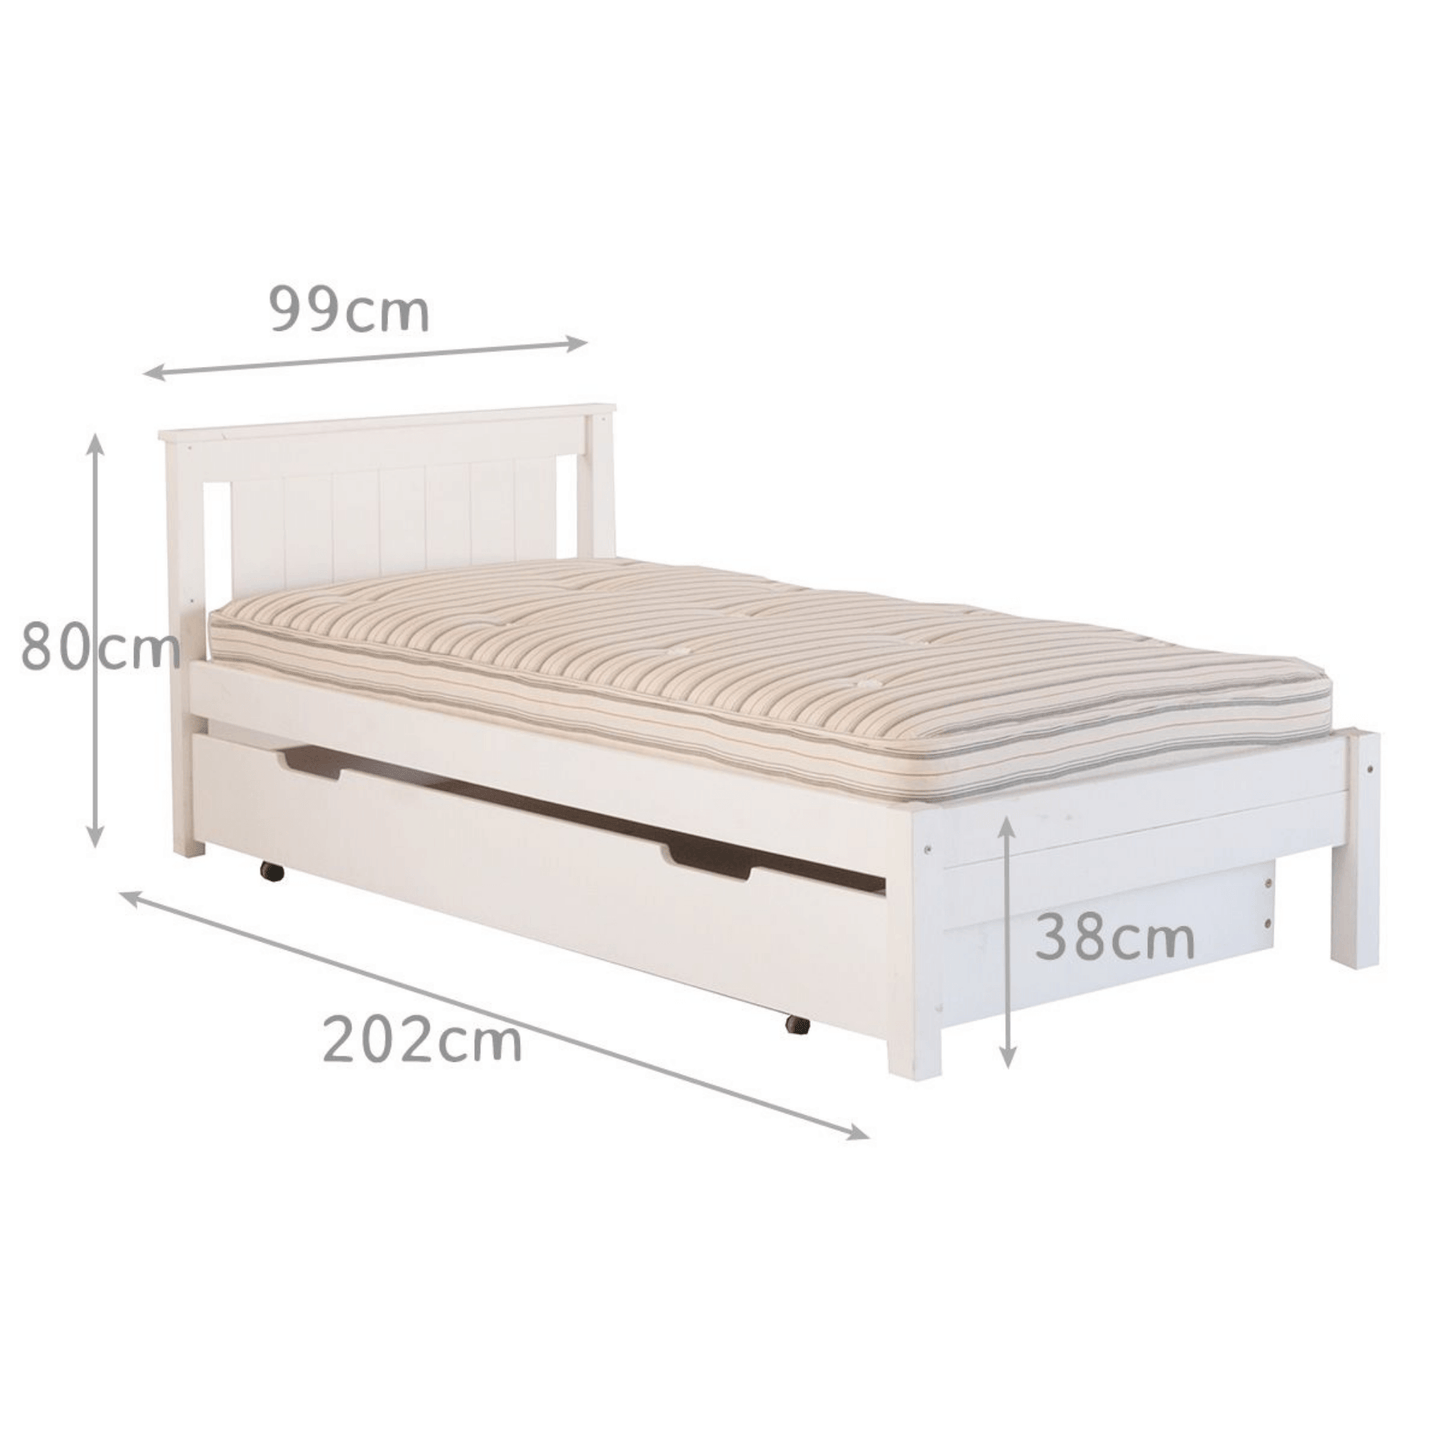 Poppy Classic Beech White Single Bed with Trundle Guest Bed Dimensions